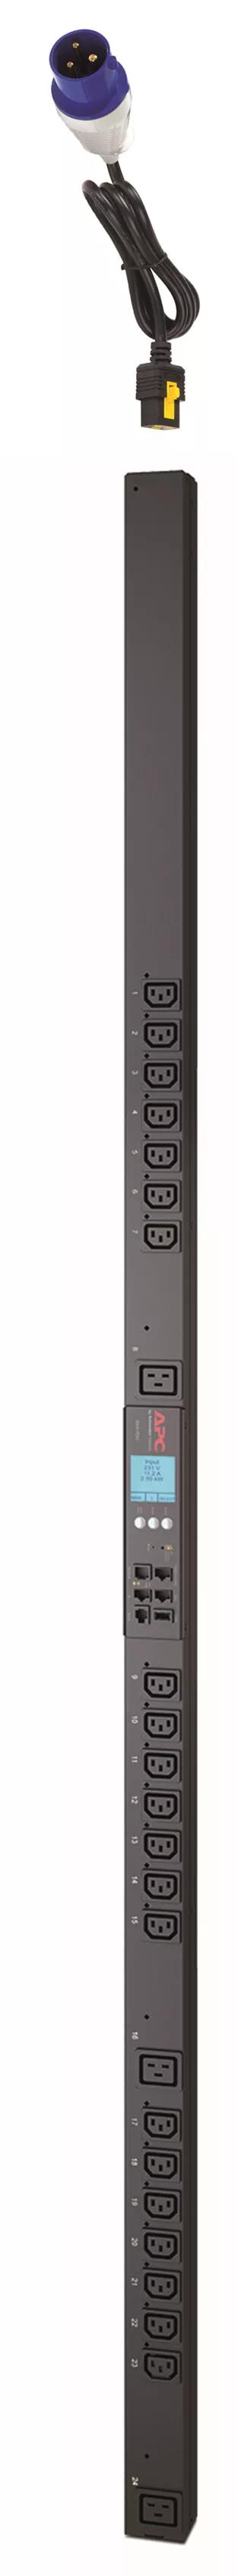 Achat APC Rack PDU 2G Metered by Outlet with Switching ZeroU au meilleur prix